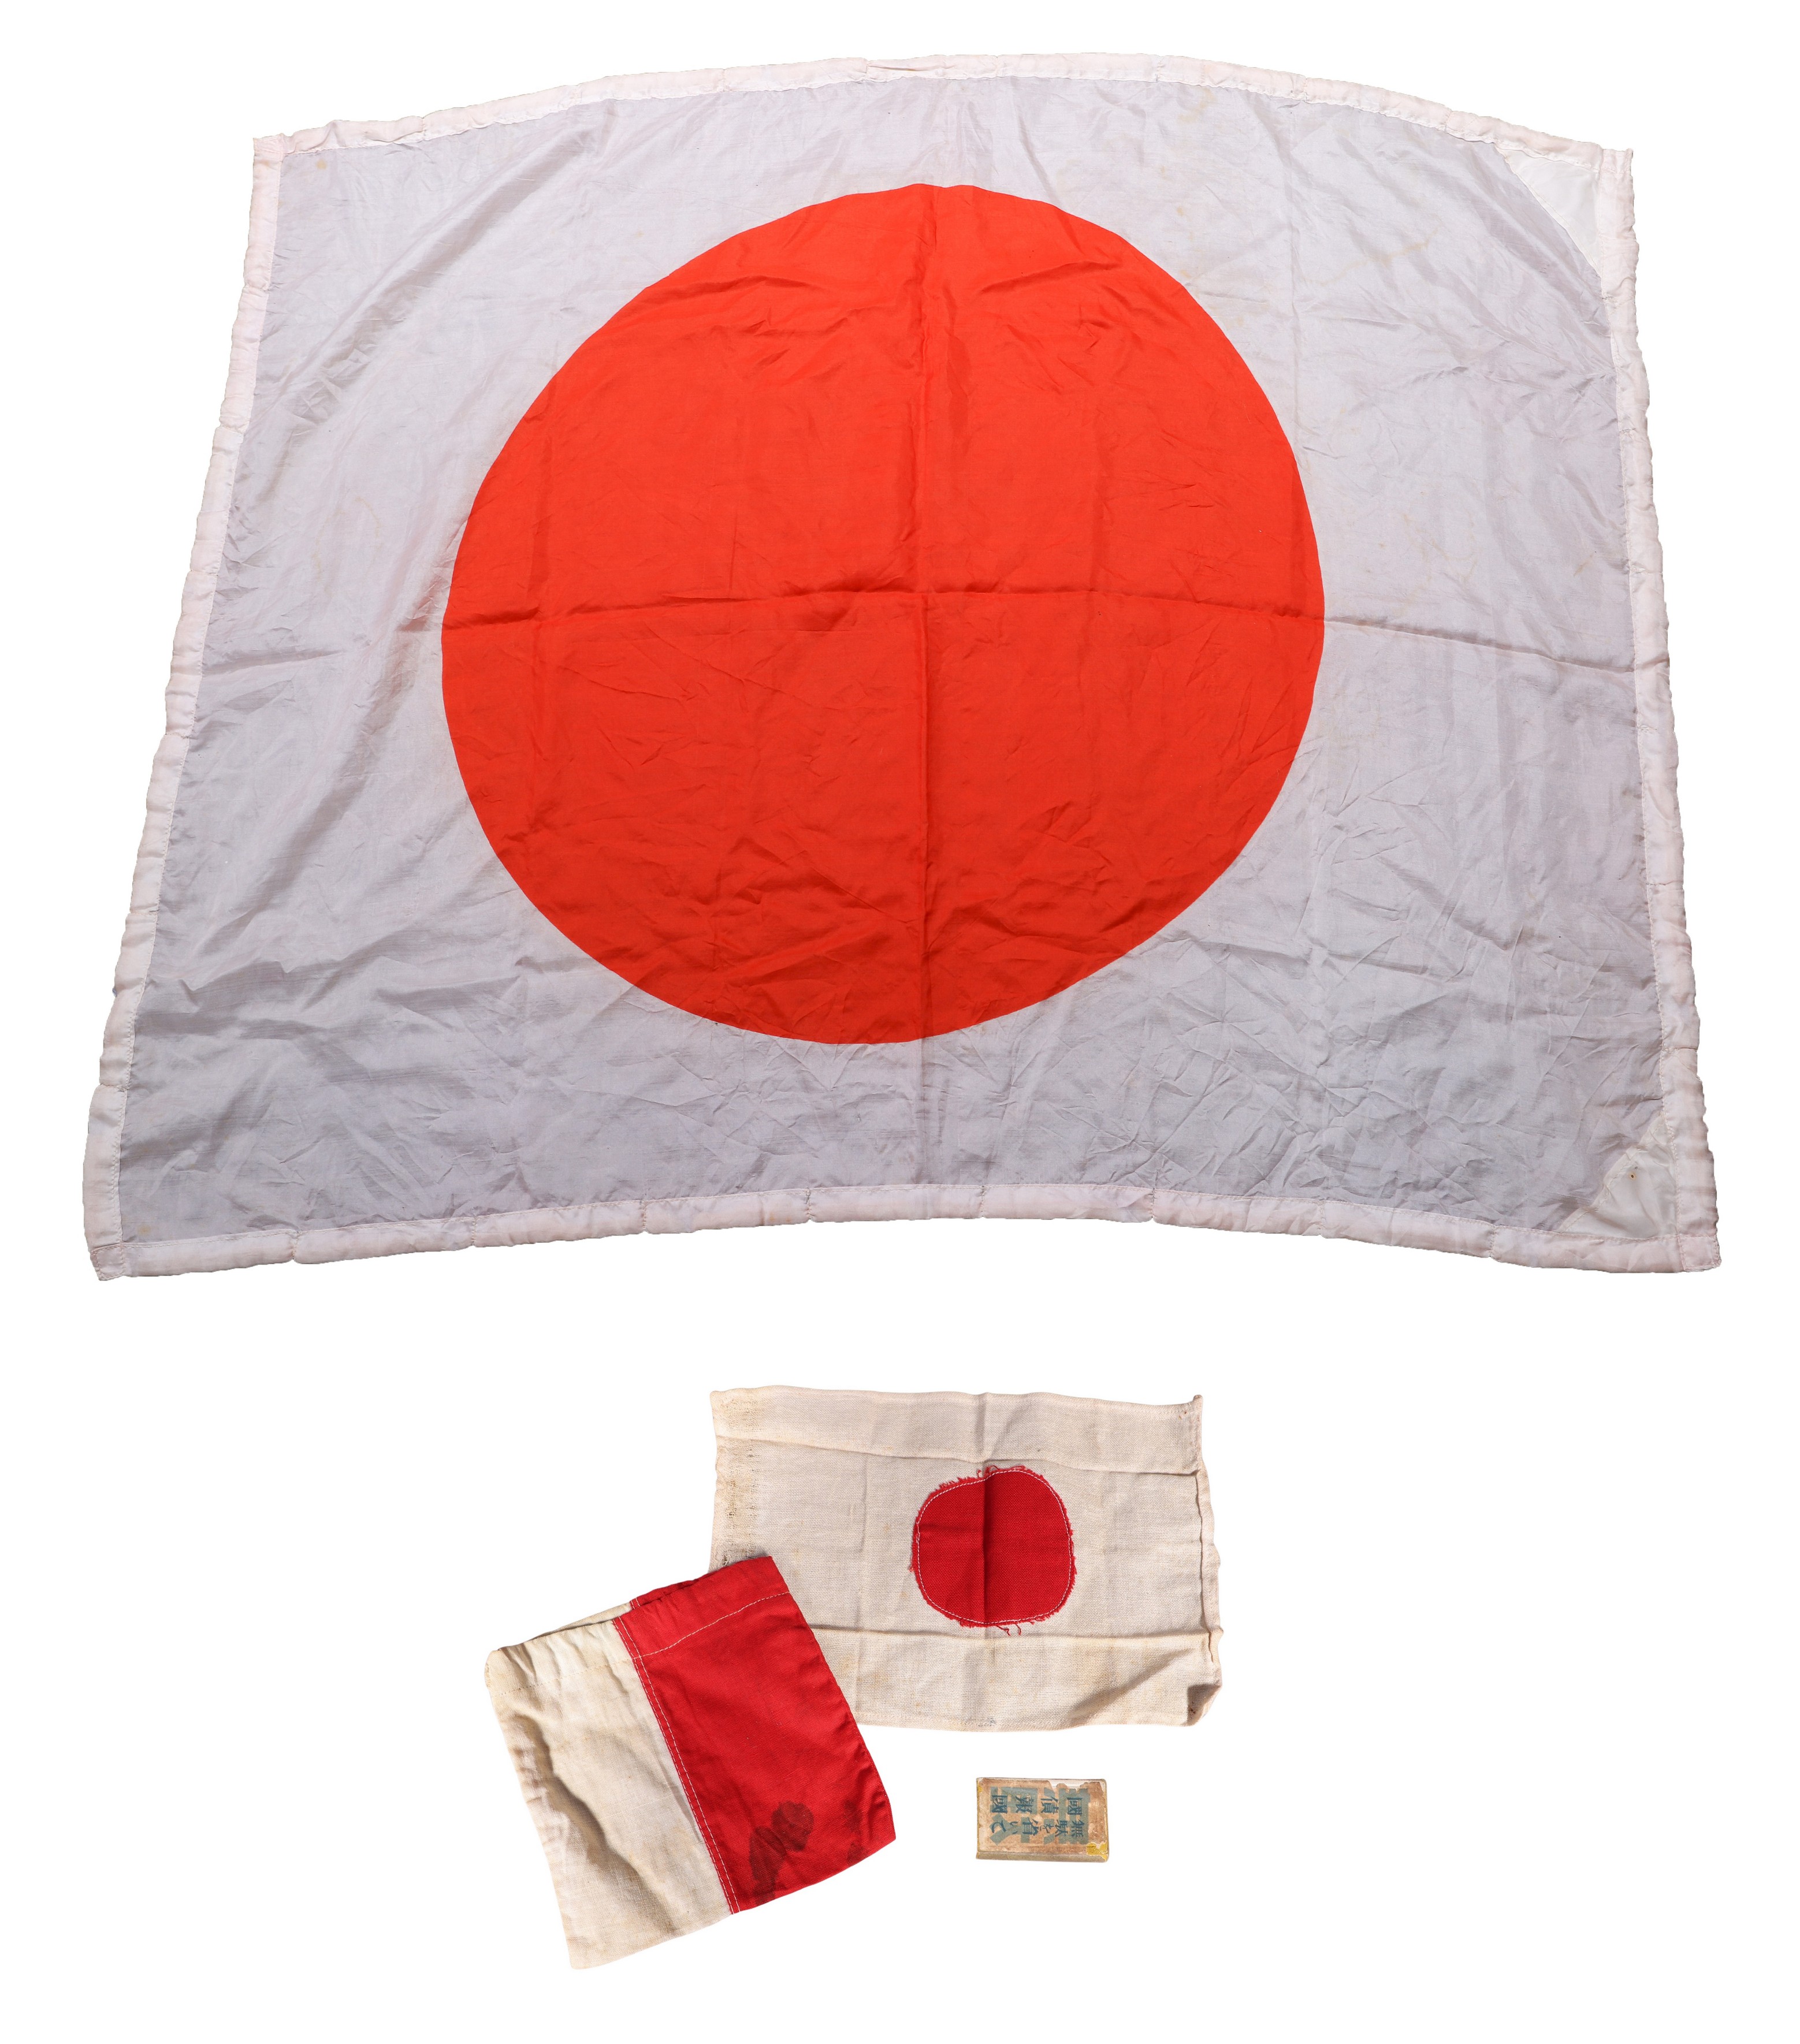 Japanese flags pouch matchstrike  3b6242